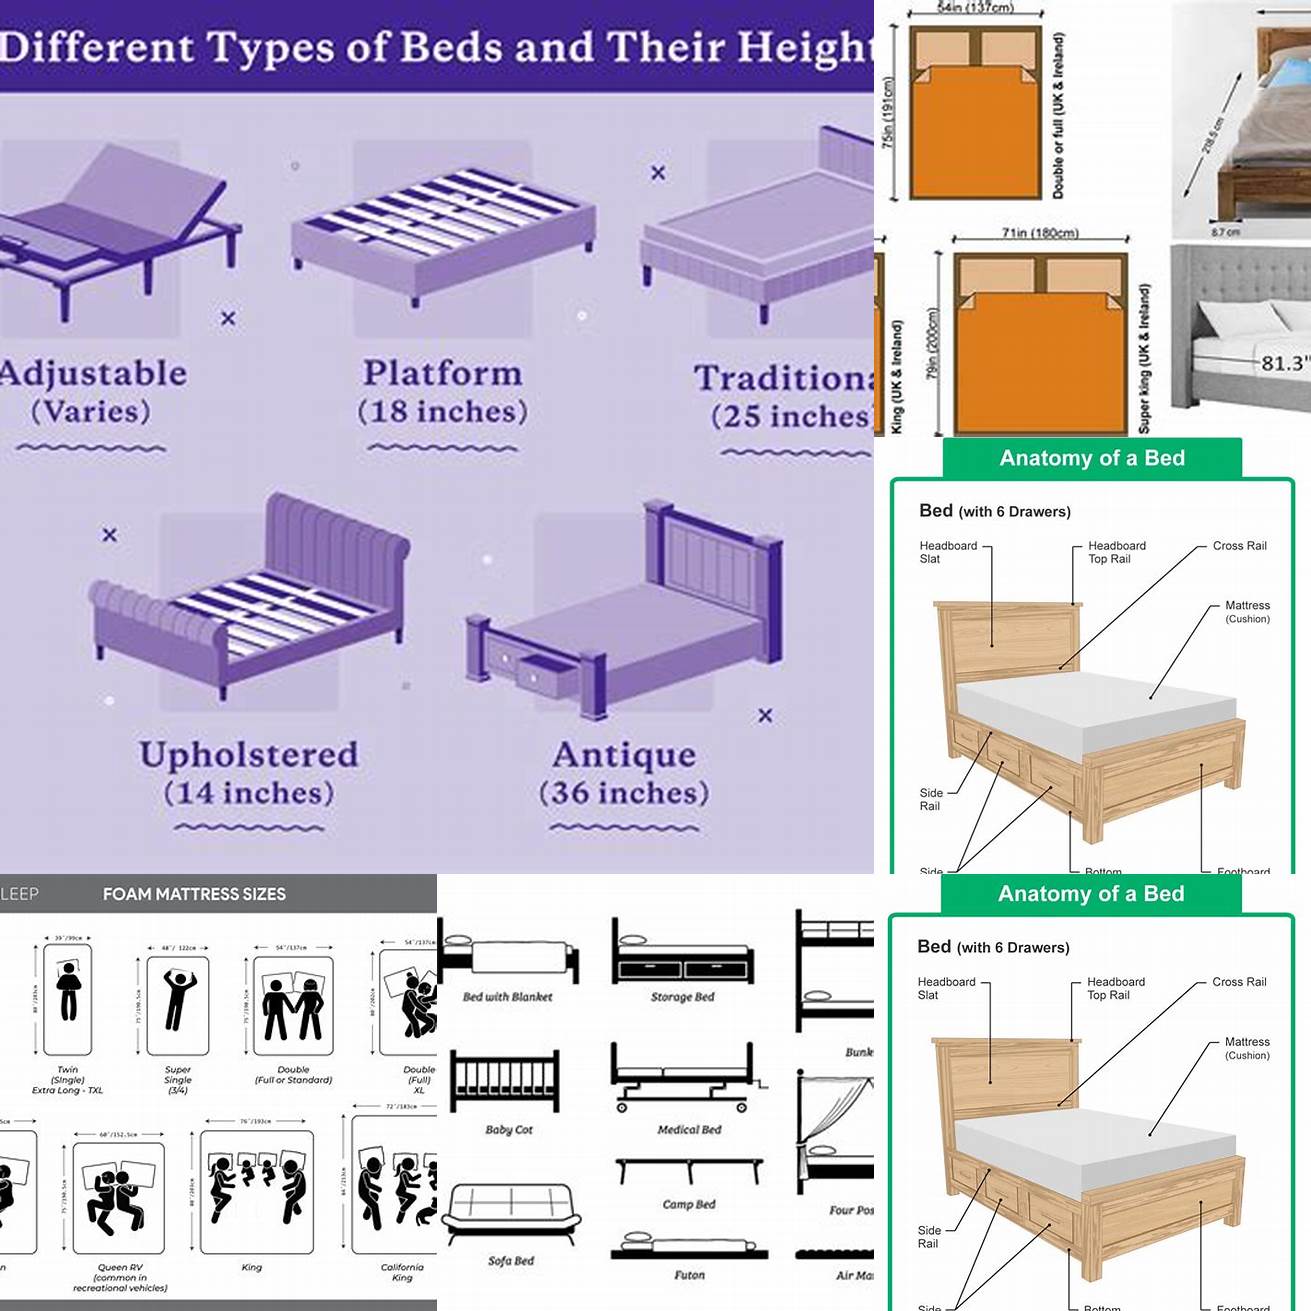 Diagram of different bed heights